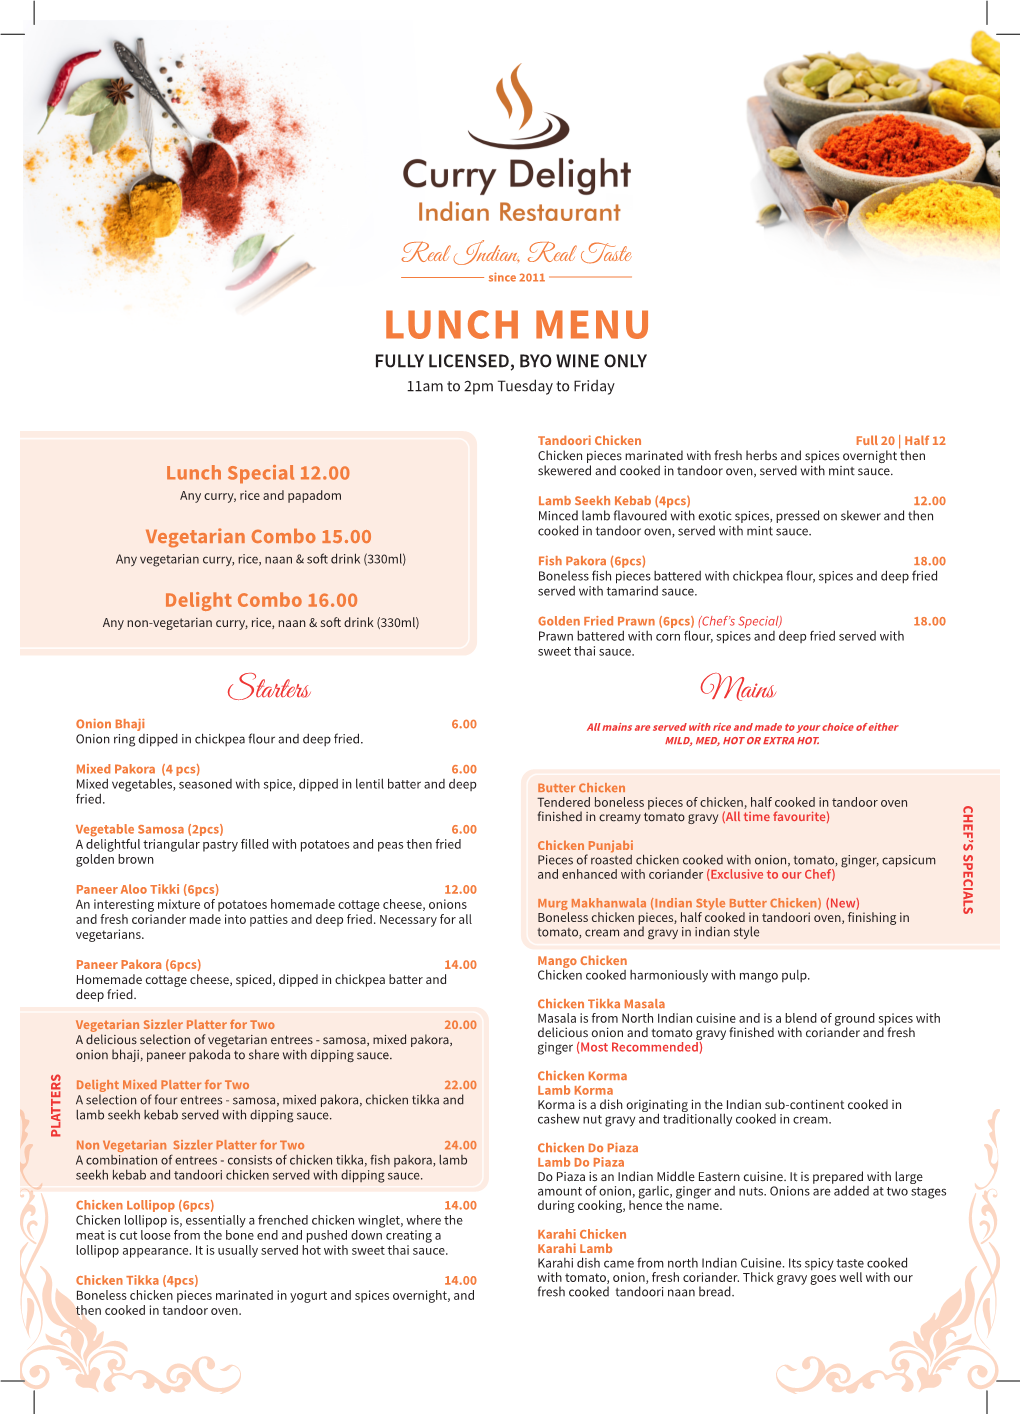 LUNCH MENU FULLY LICENSED, BYO WINE ONLY 11Am to 2Pm Tuesday to Friday